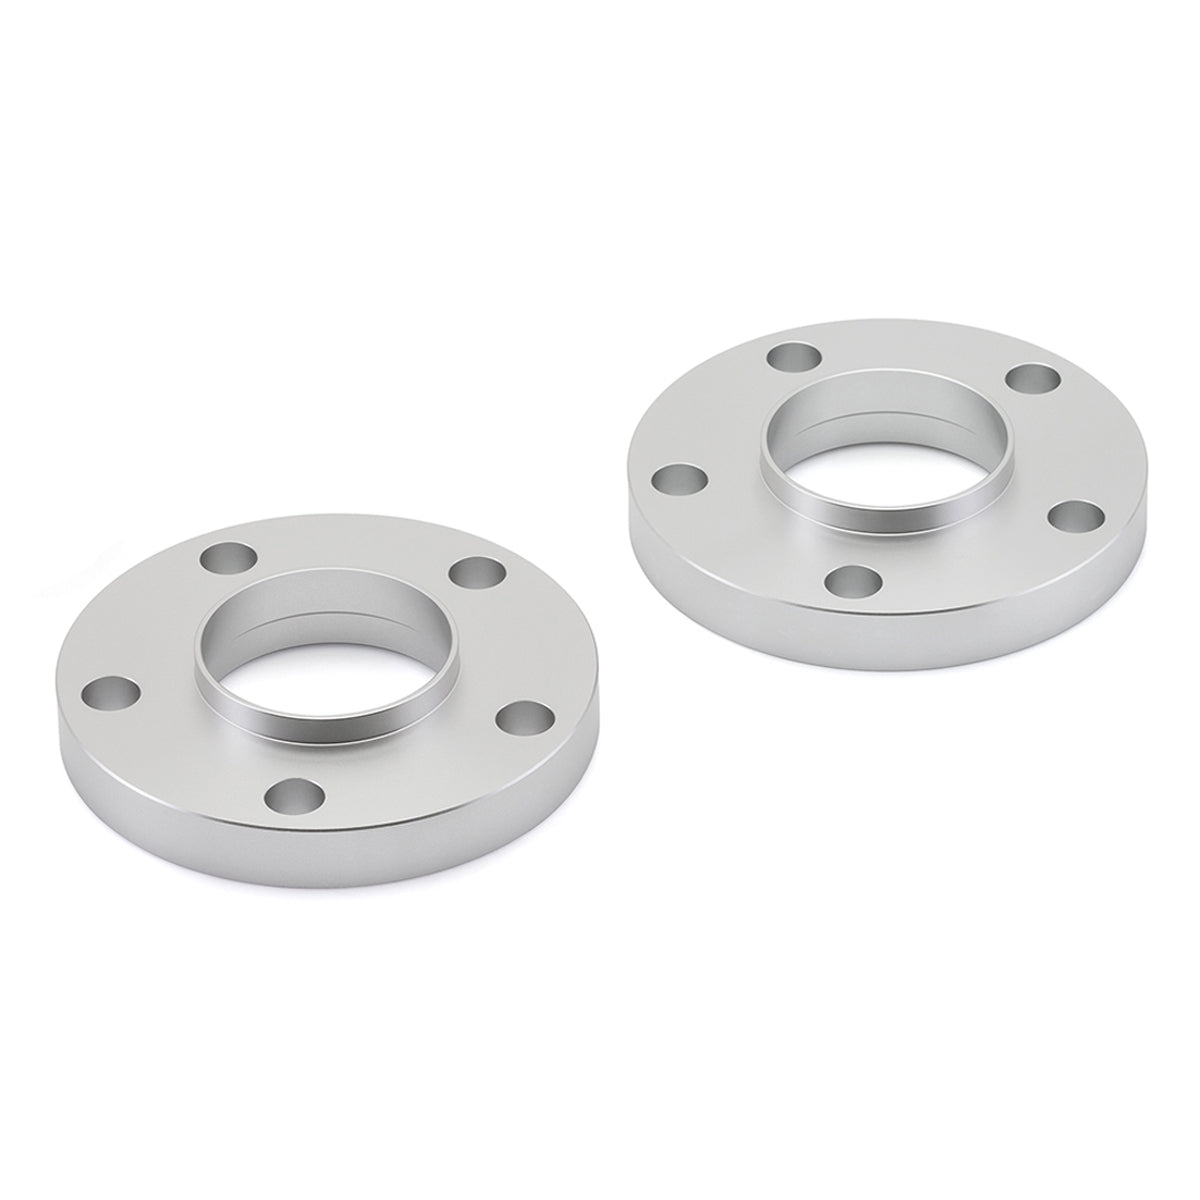 2004-2017 BMW 1 Series 5x120 Hubcentric Wheelcentric Wheel Spacers set of 2